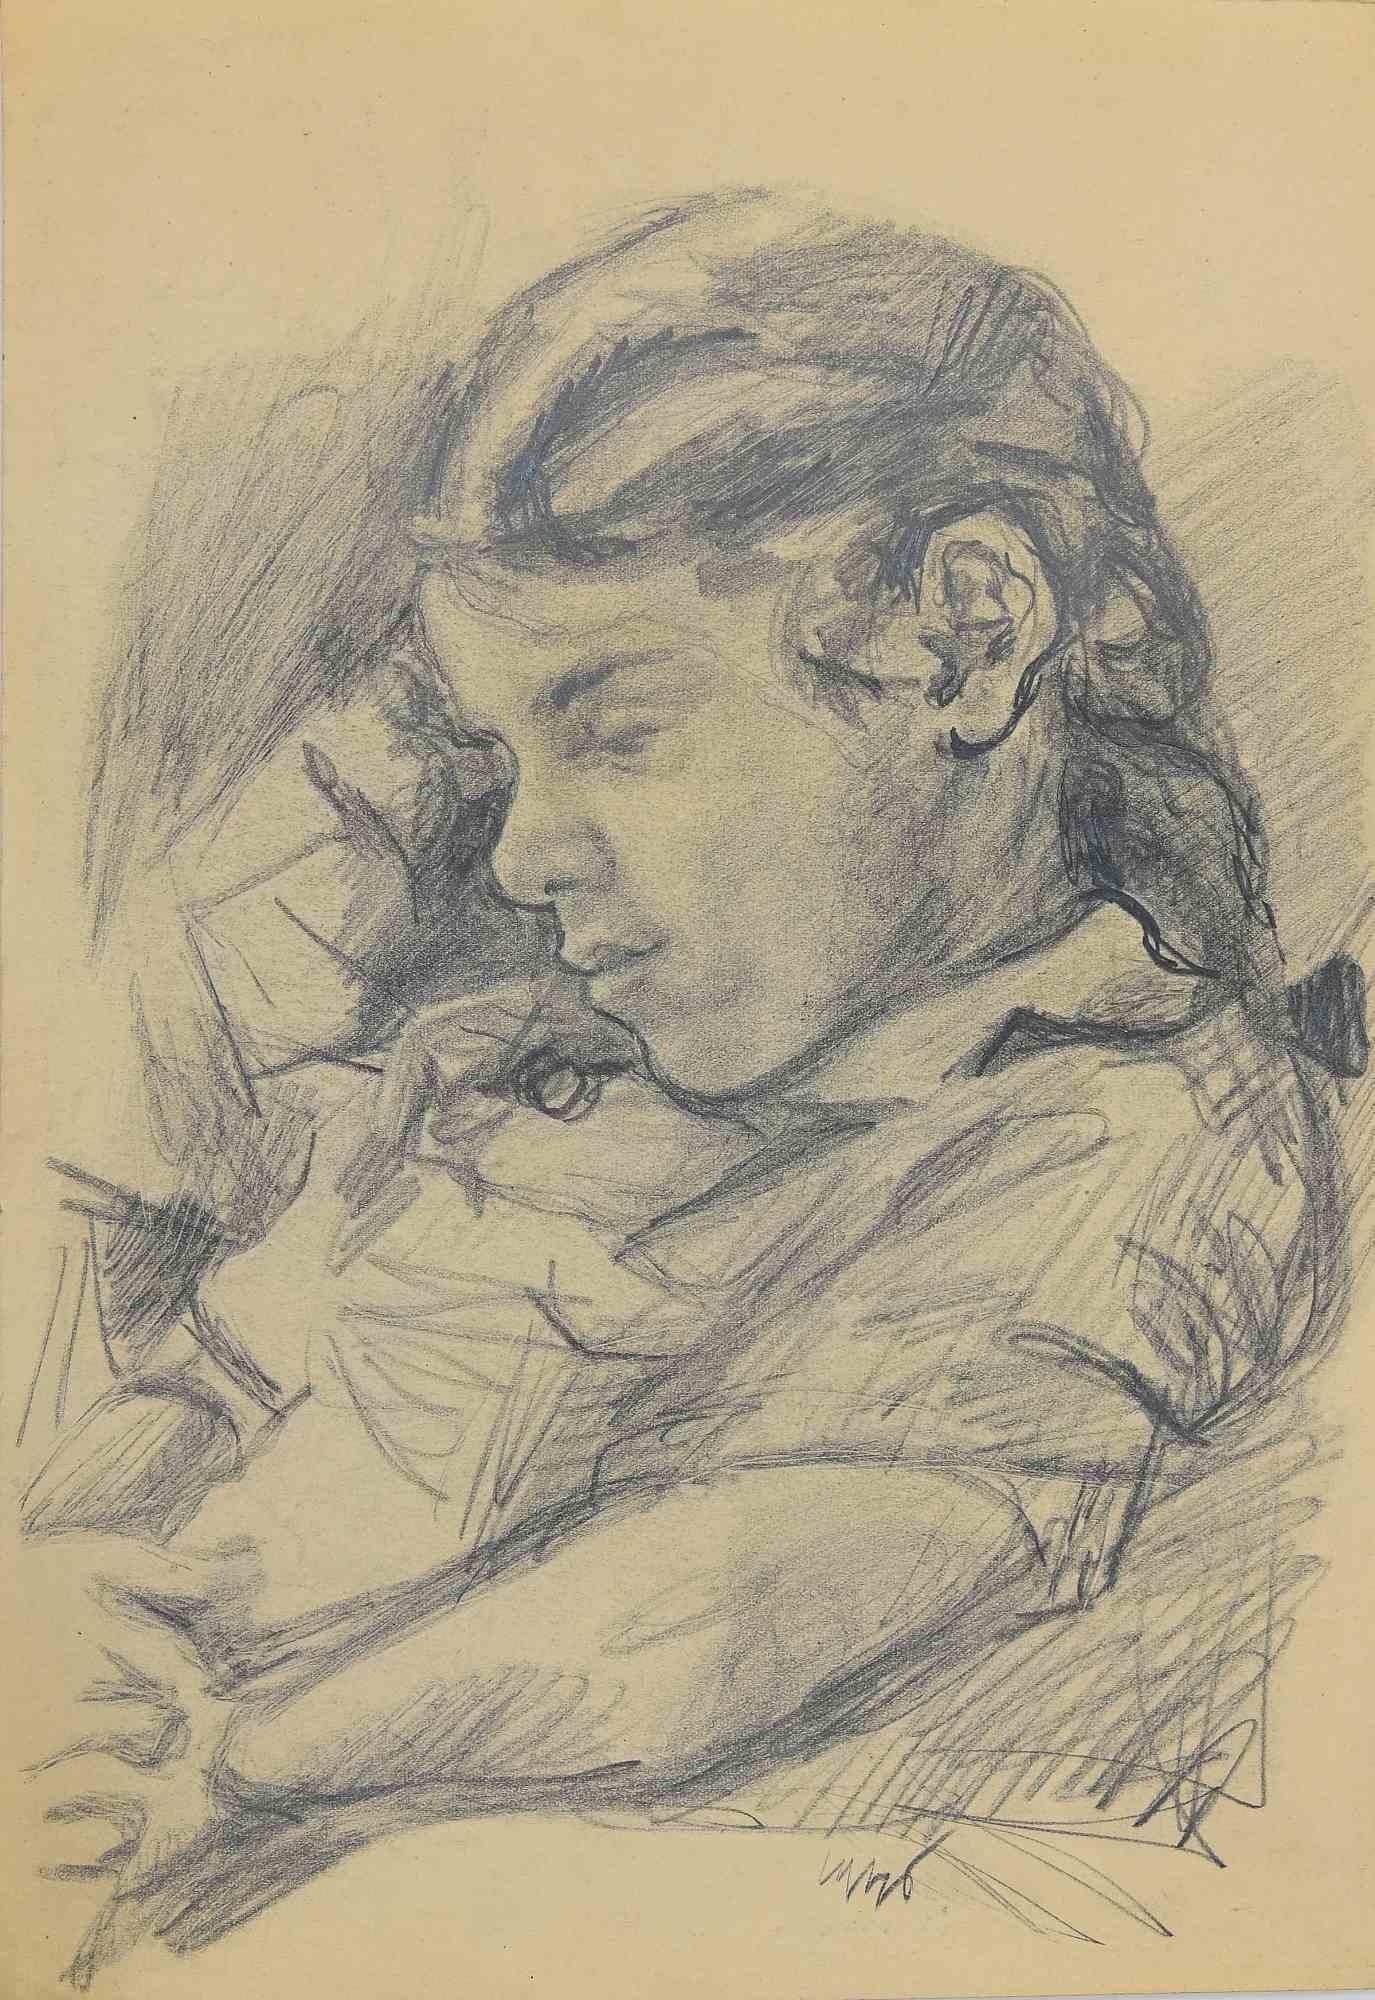 The Girl is an original pencil Drawing realized by Mino Maccari in mid-20th century.

Good condition on a yellowed paper.

Hand-signed by the artist with pencil.

Mino Maccari (1898-1989) was an Italian writer, painter, engraver and journalist,